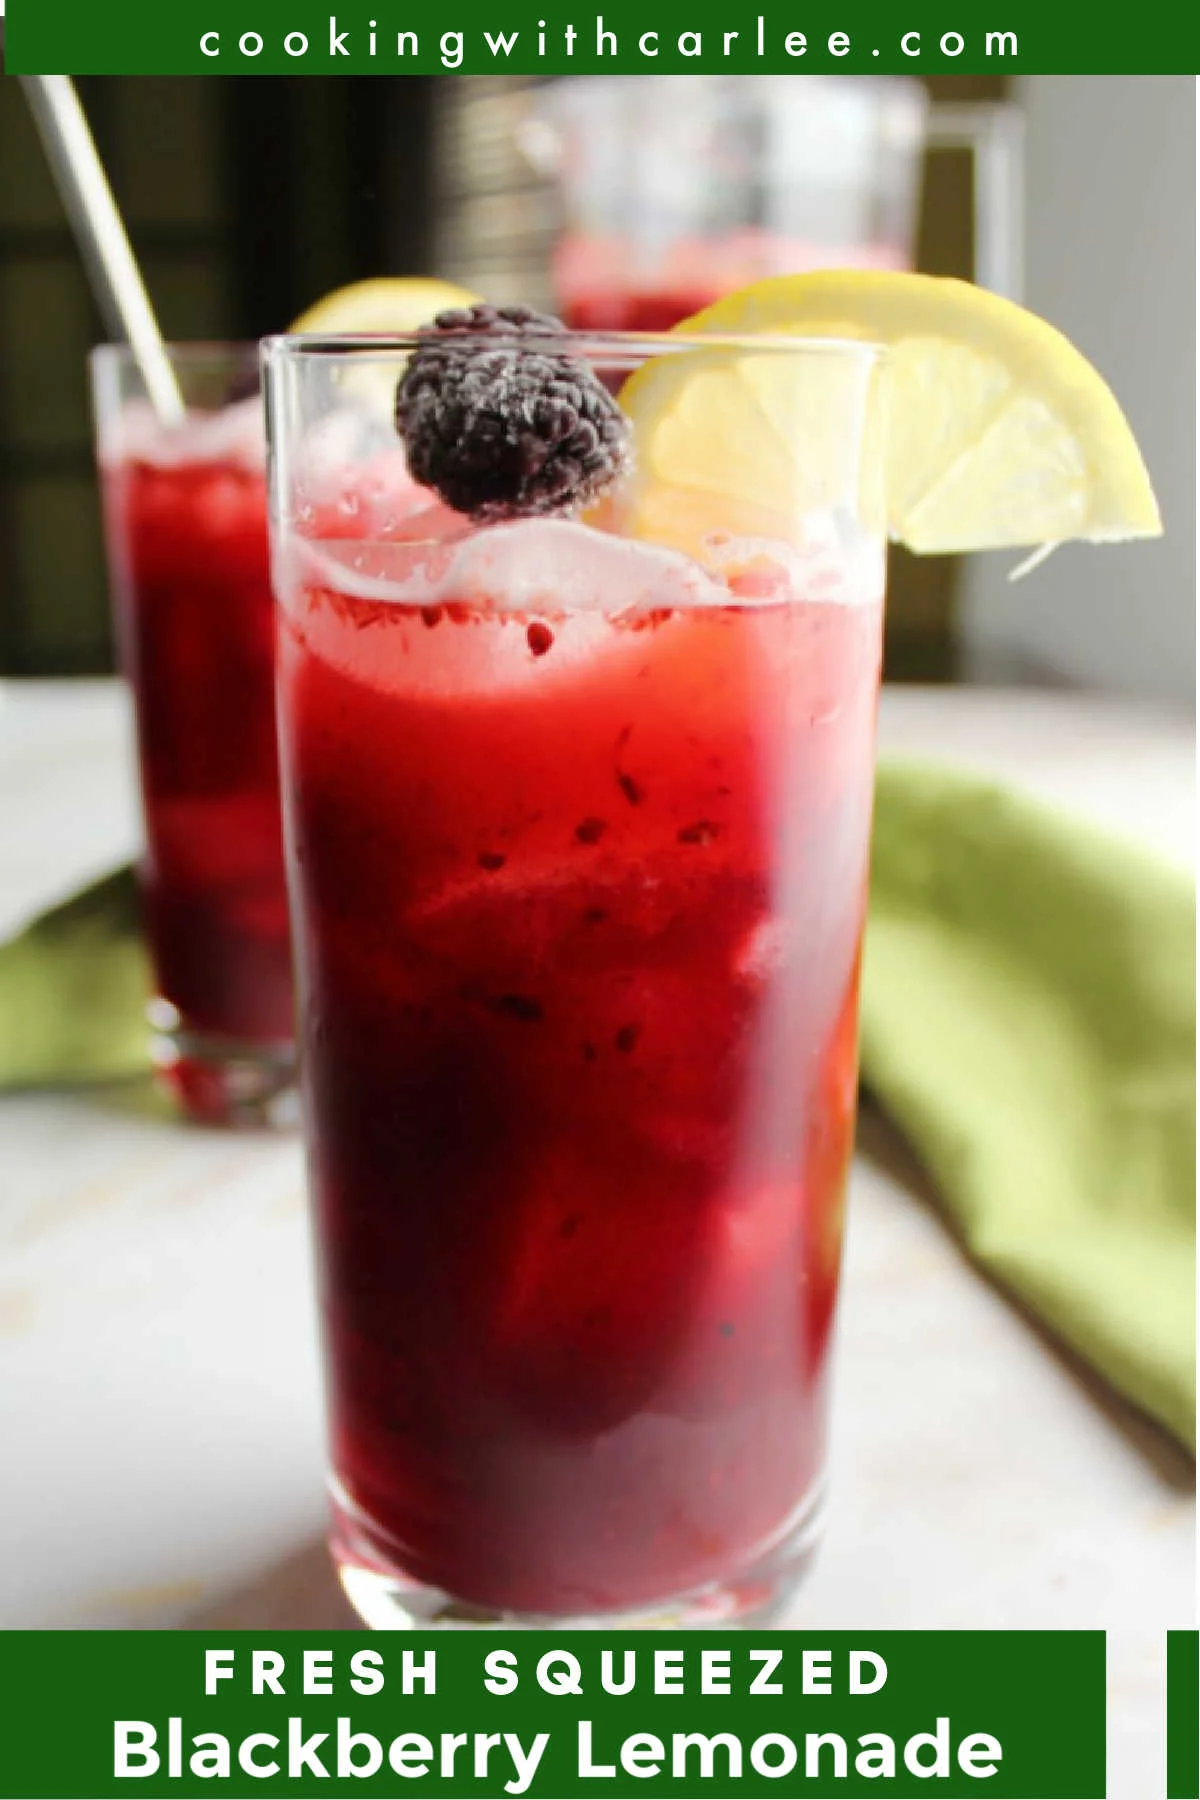 The perfect combination of tart, bright and lightly sweet, this homemade blackberry lemonade is sure to become your favorite warm weather drink.